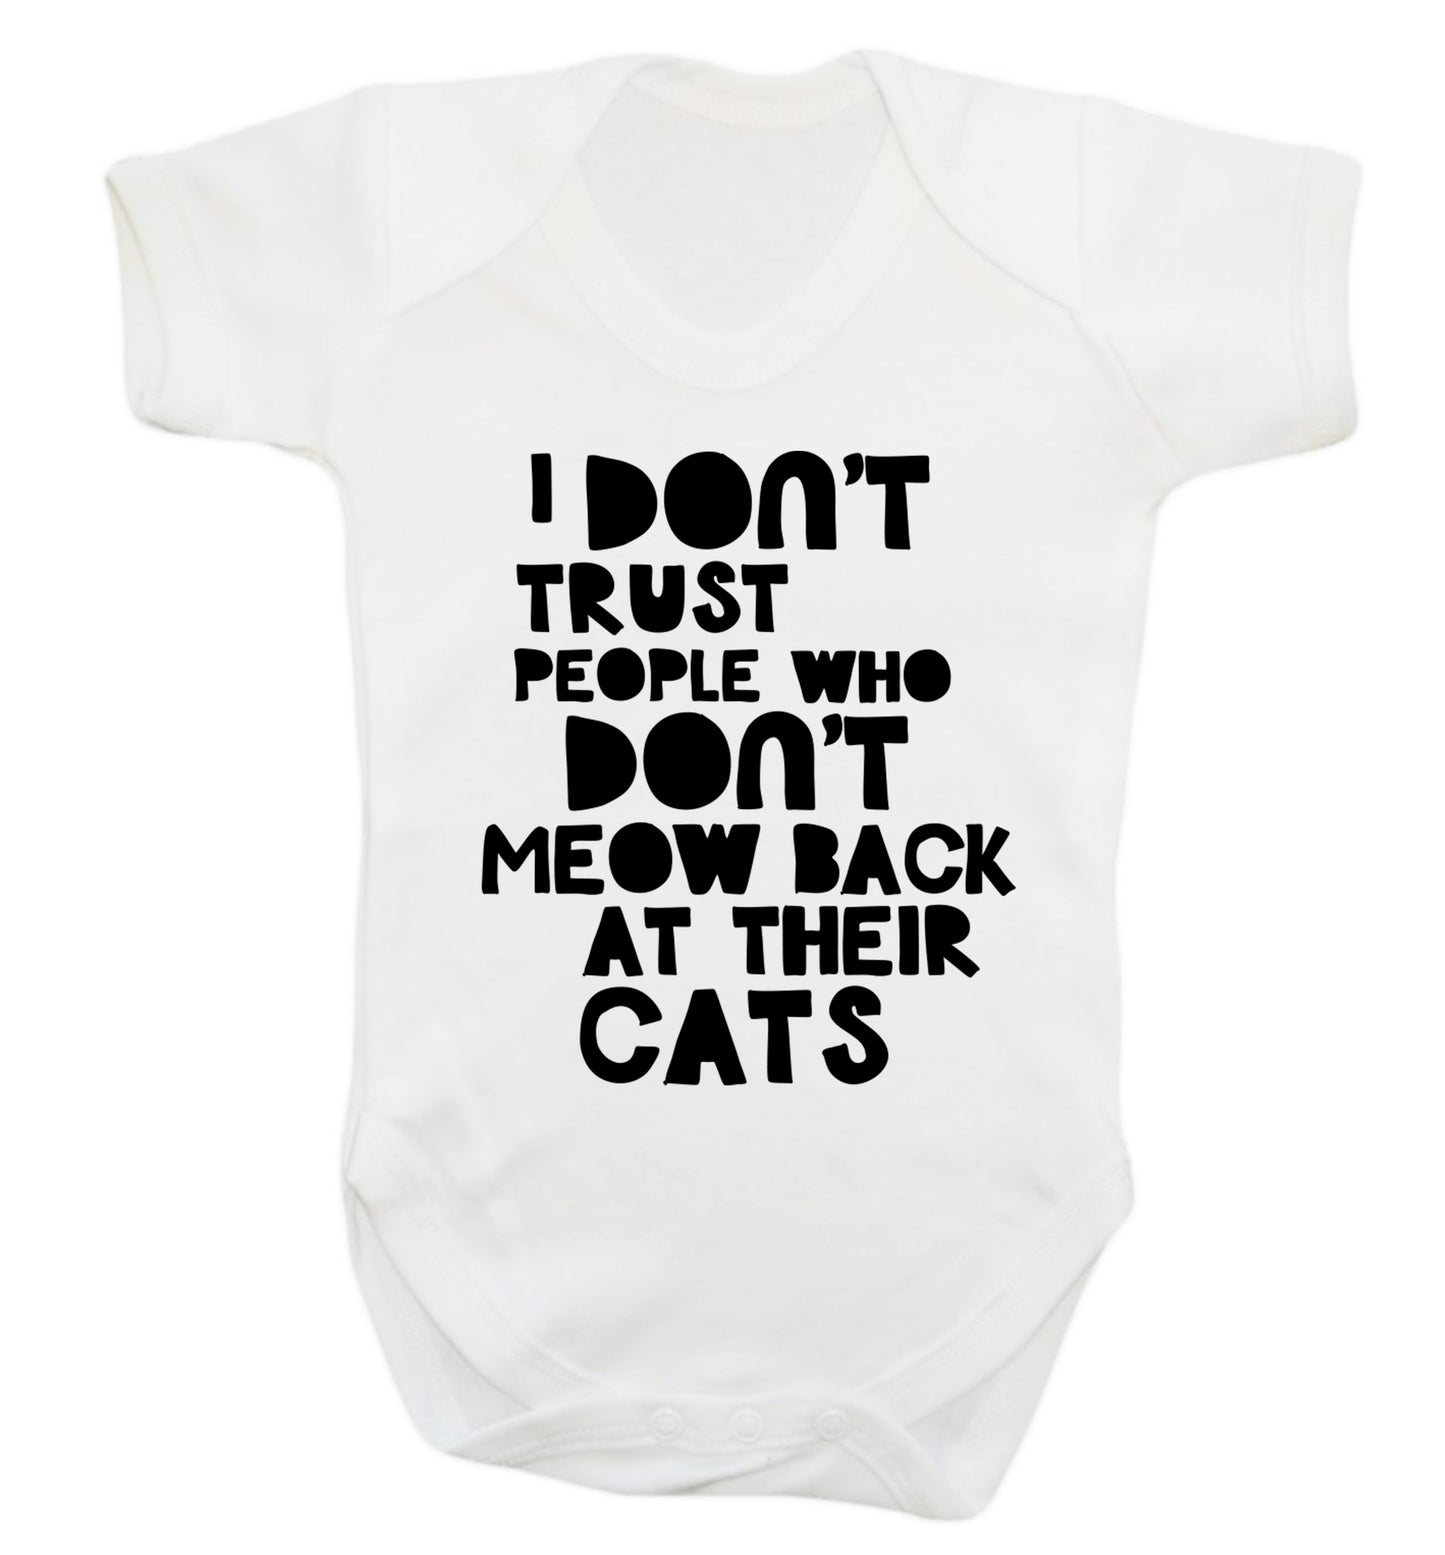 I don't trust people who don't meow back at their cats Baby Vest white 18-24 months